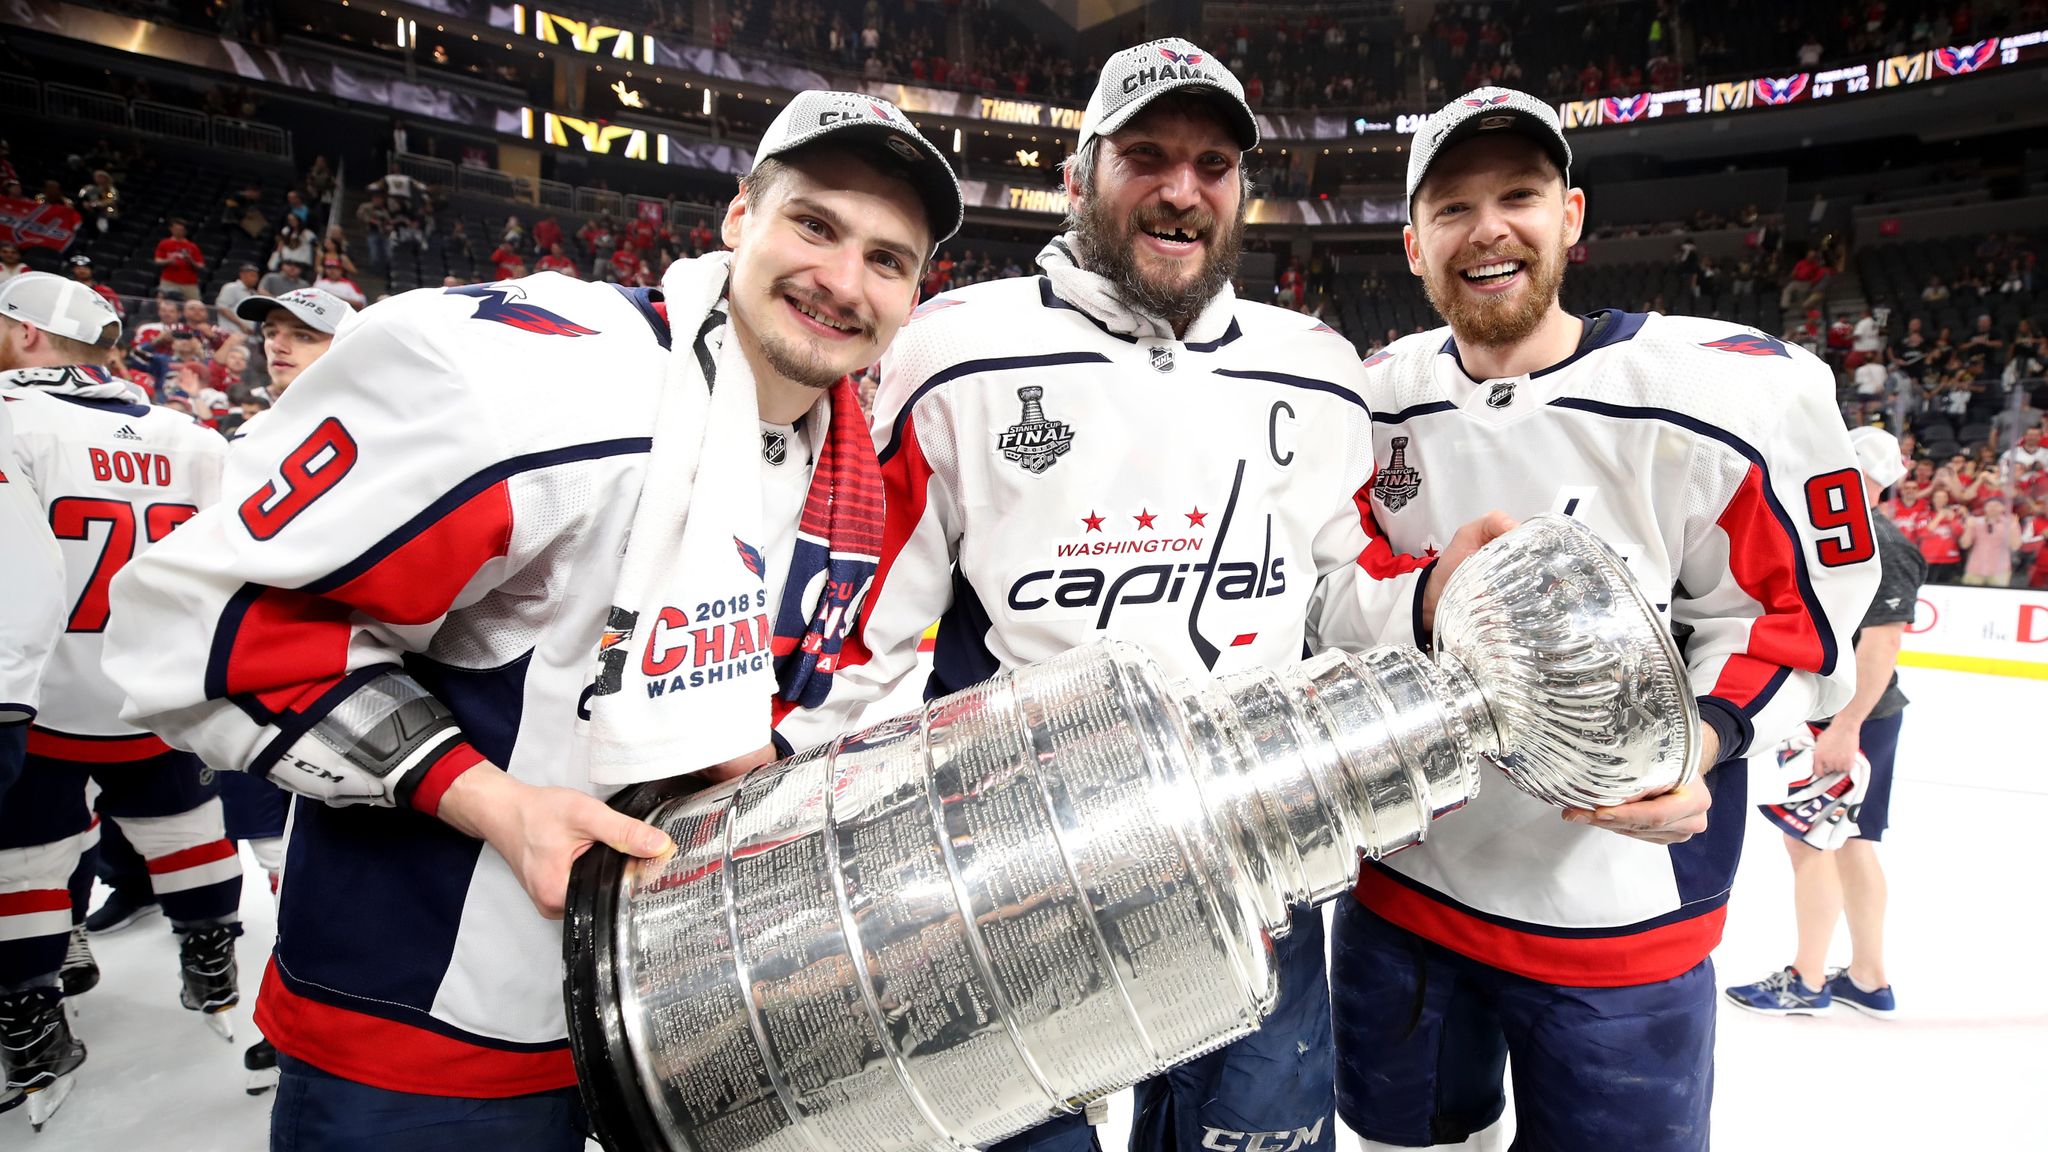 Capitals win Stanley Cup, Washington's first major sports